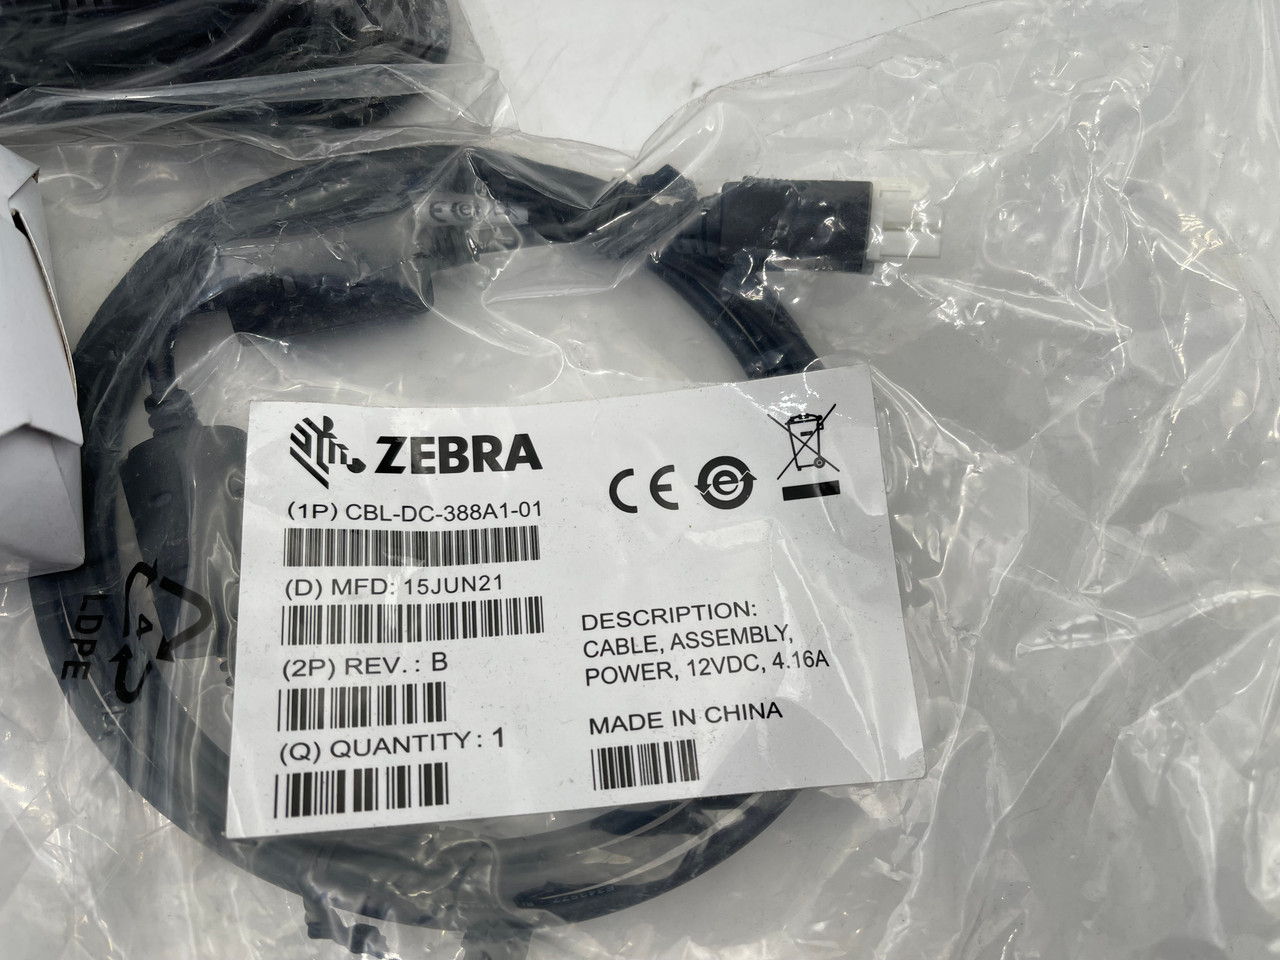 ZEBRA CRD-TC7X-SE2EPP-02 2-BAY SHARECRADLE BASE CHARGER W/ CABLES - NEW